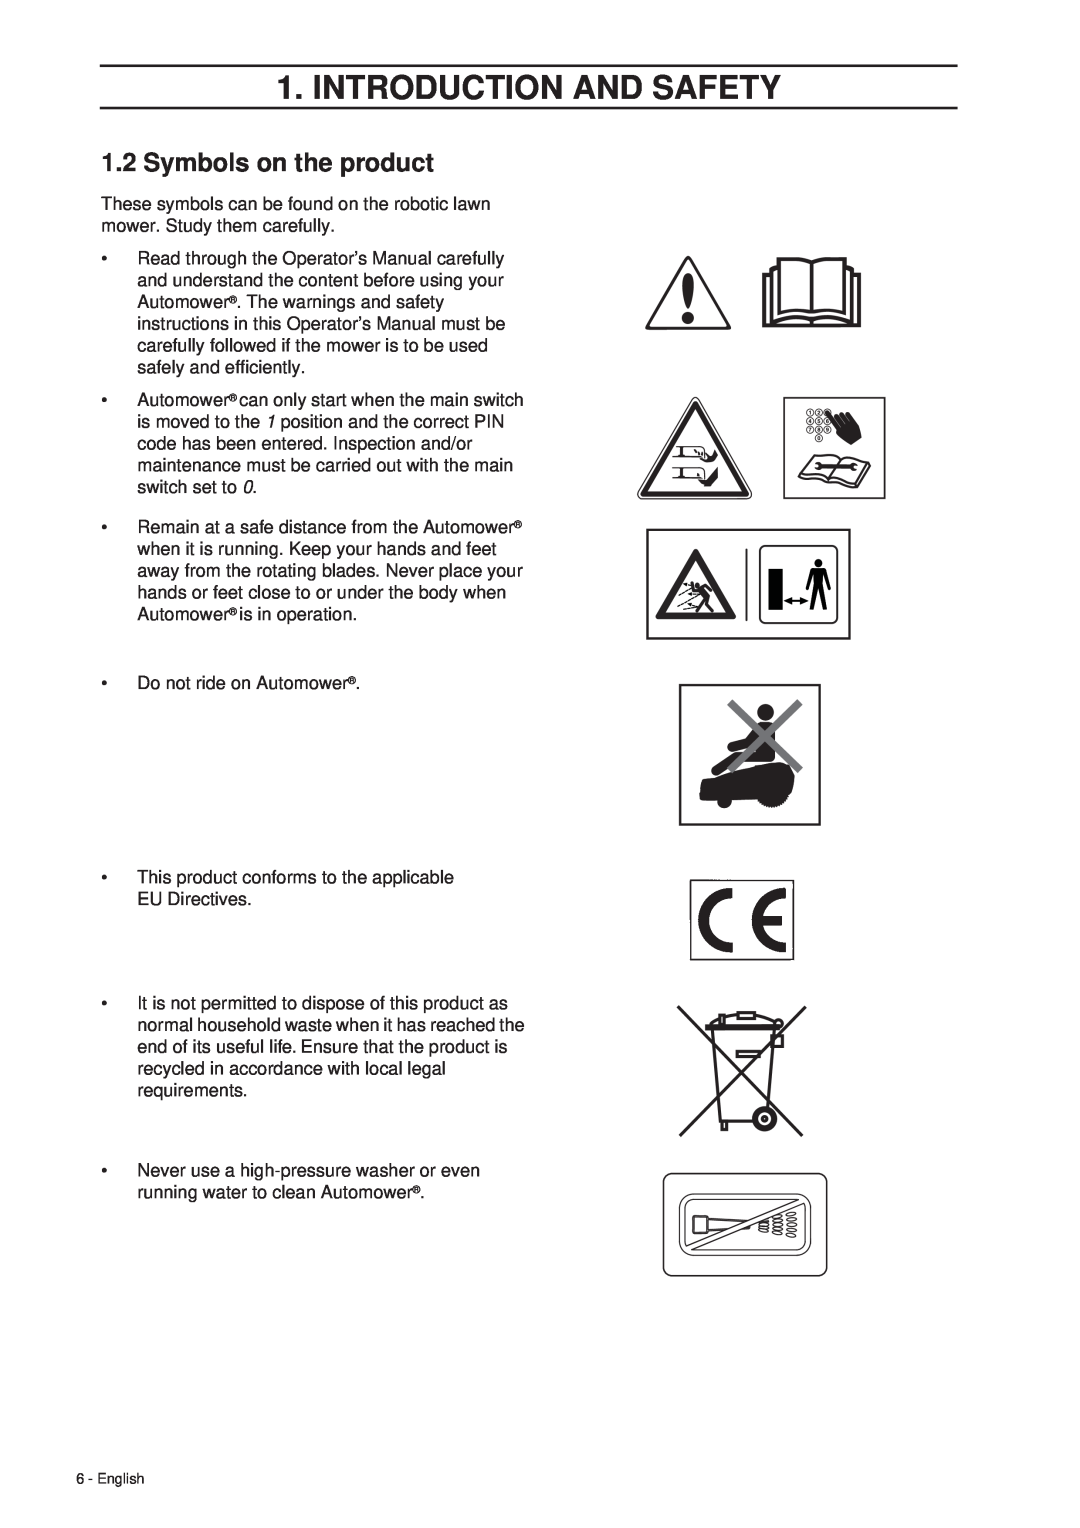 Husqvarna 305 manual 1.2Symbols on the product, Introduction And Safety 